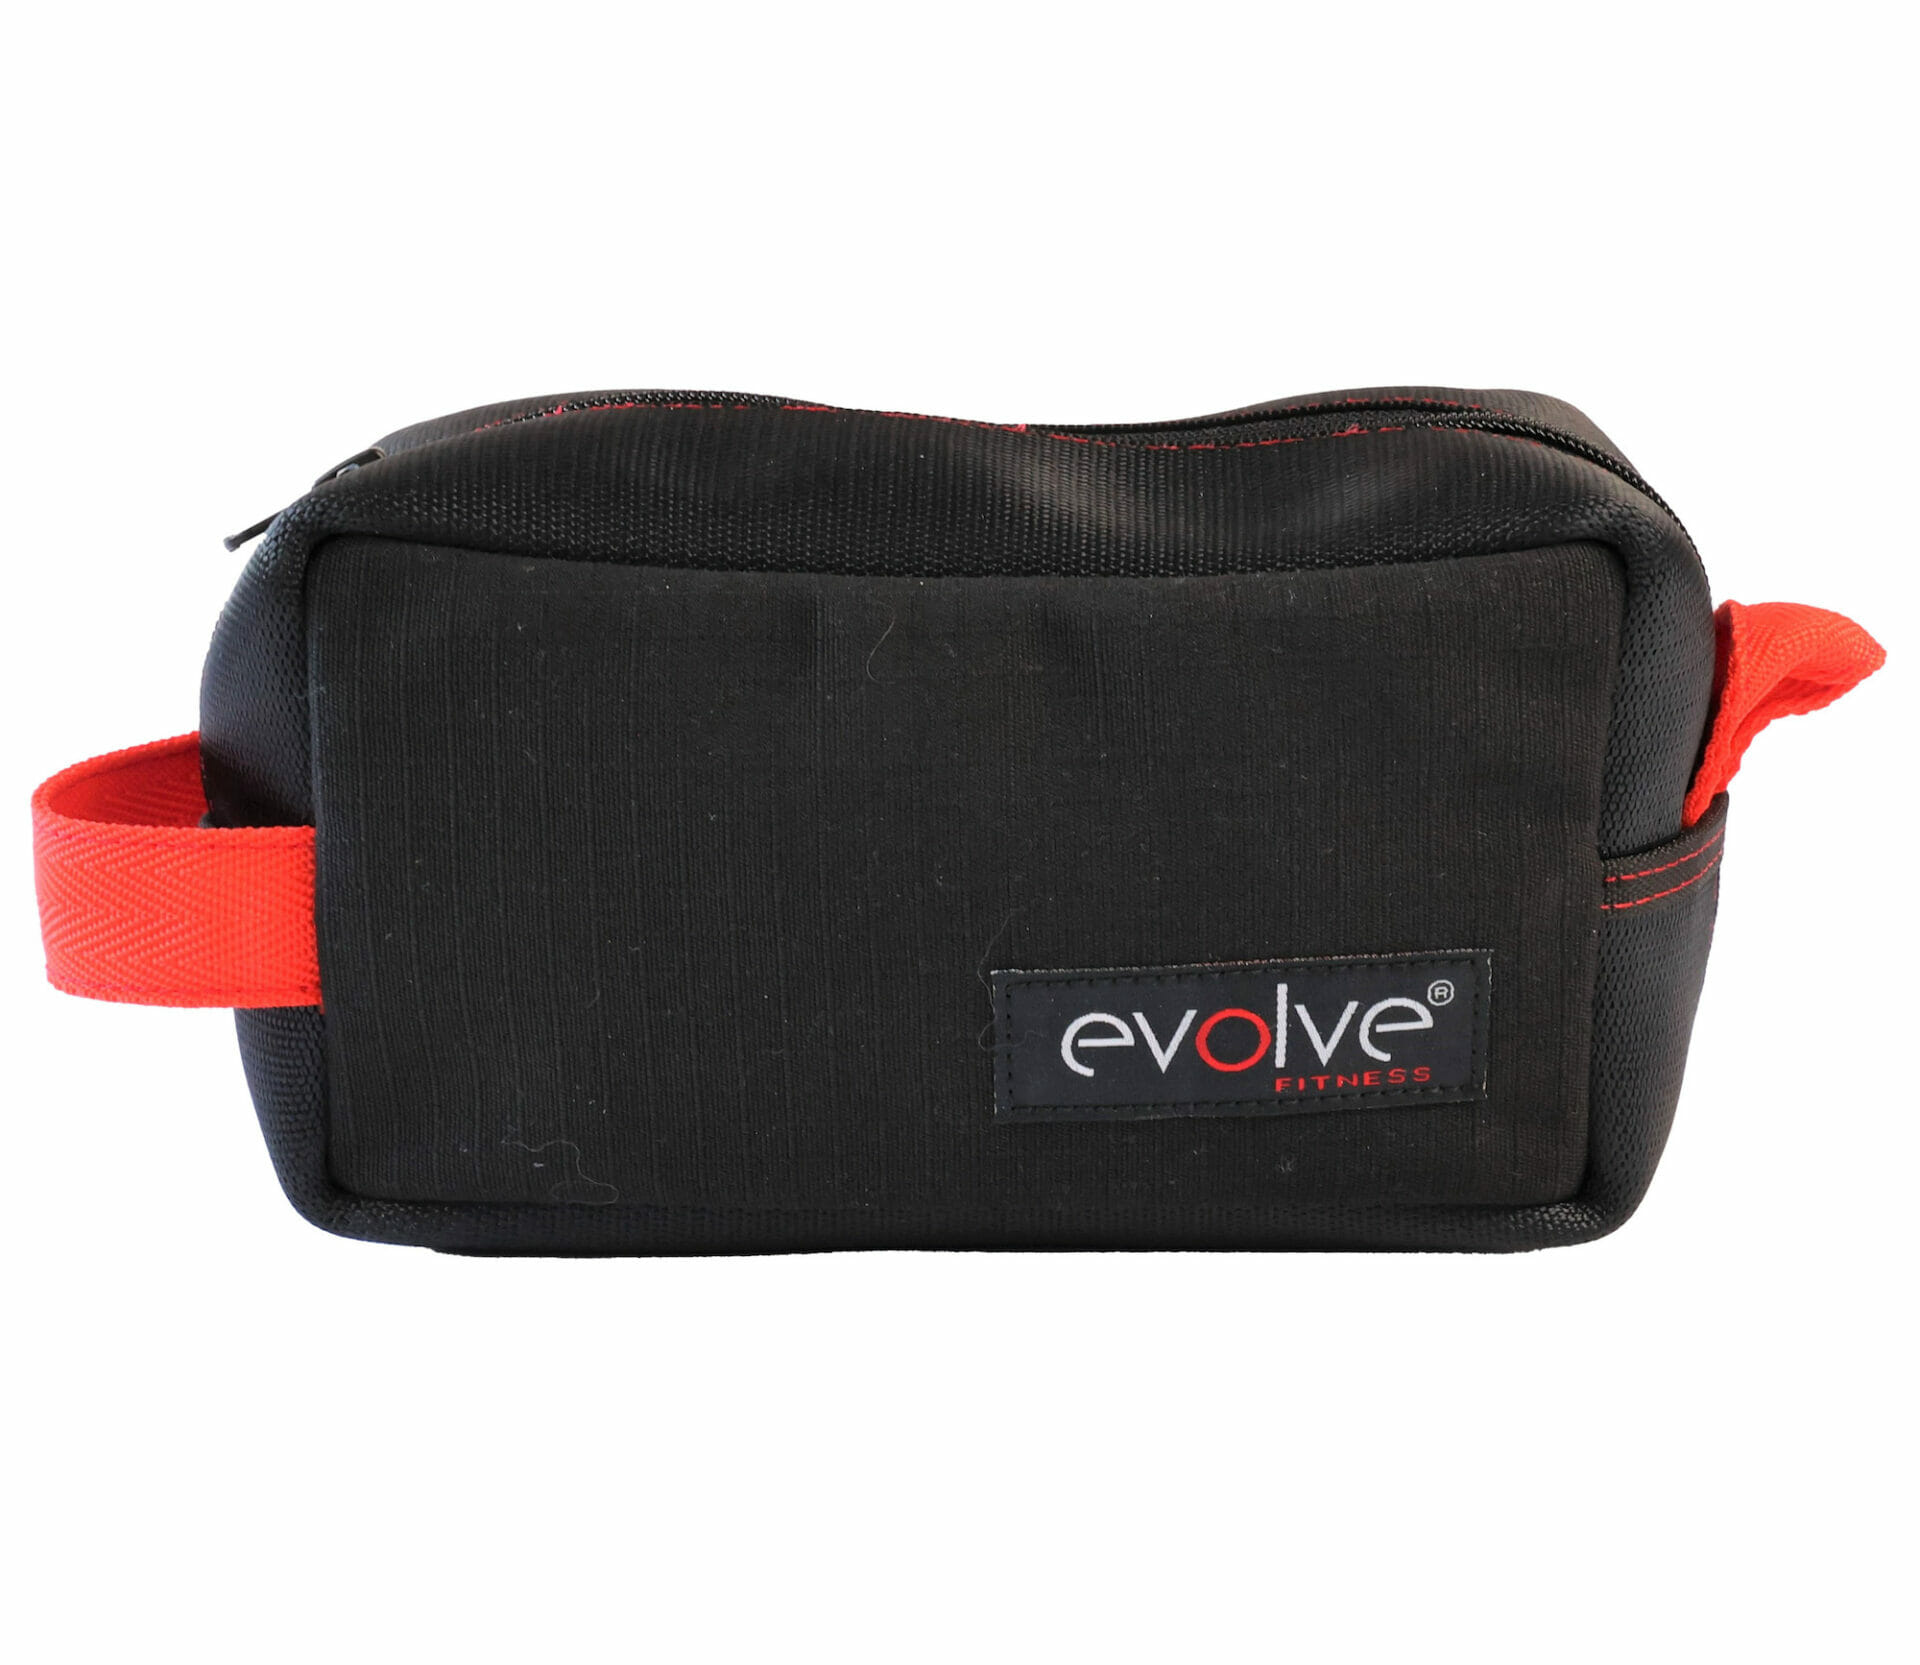 Black pouch with red accents, customized with the Evolve Fitness logo